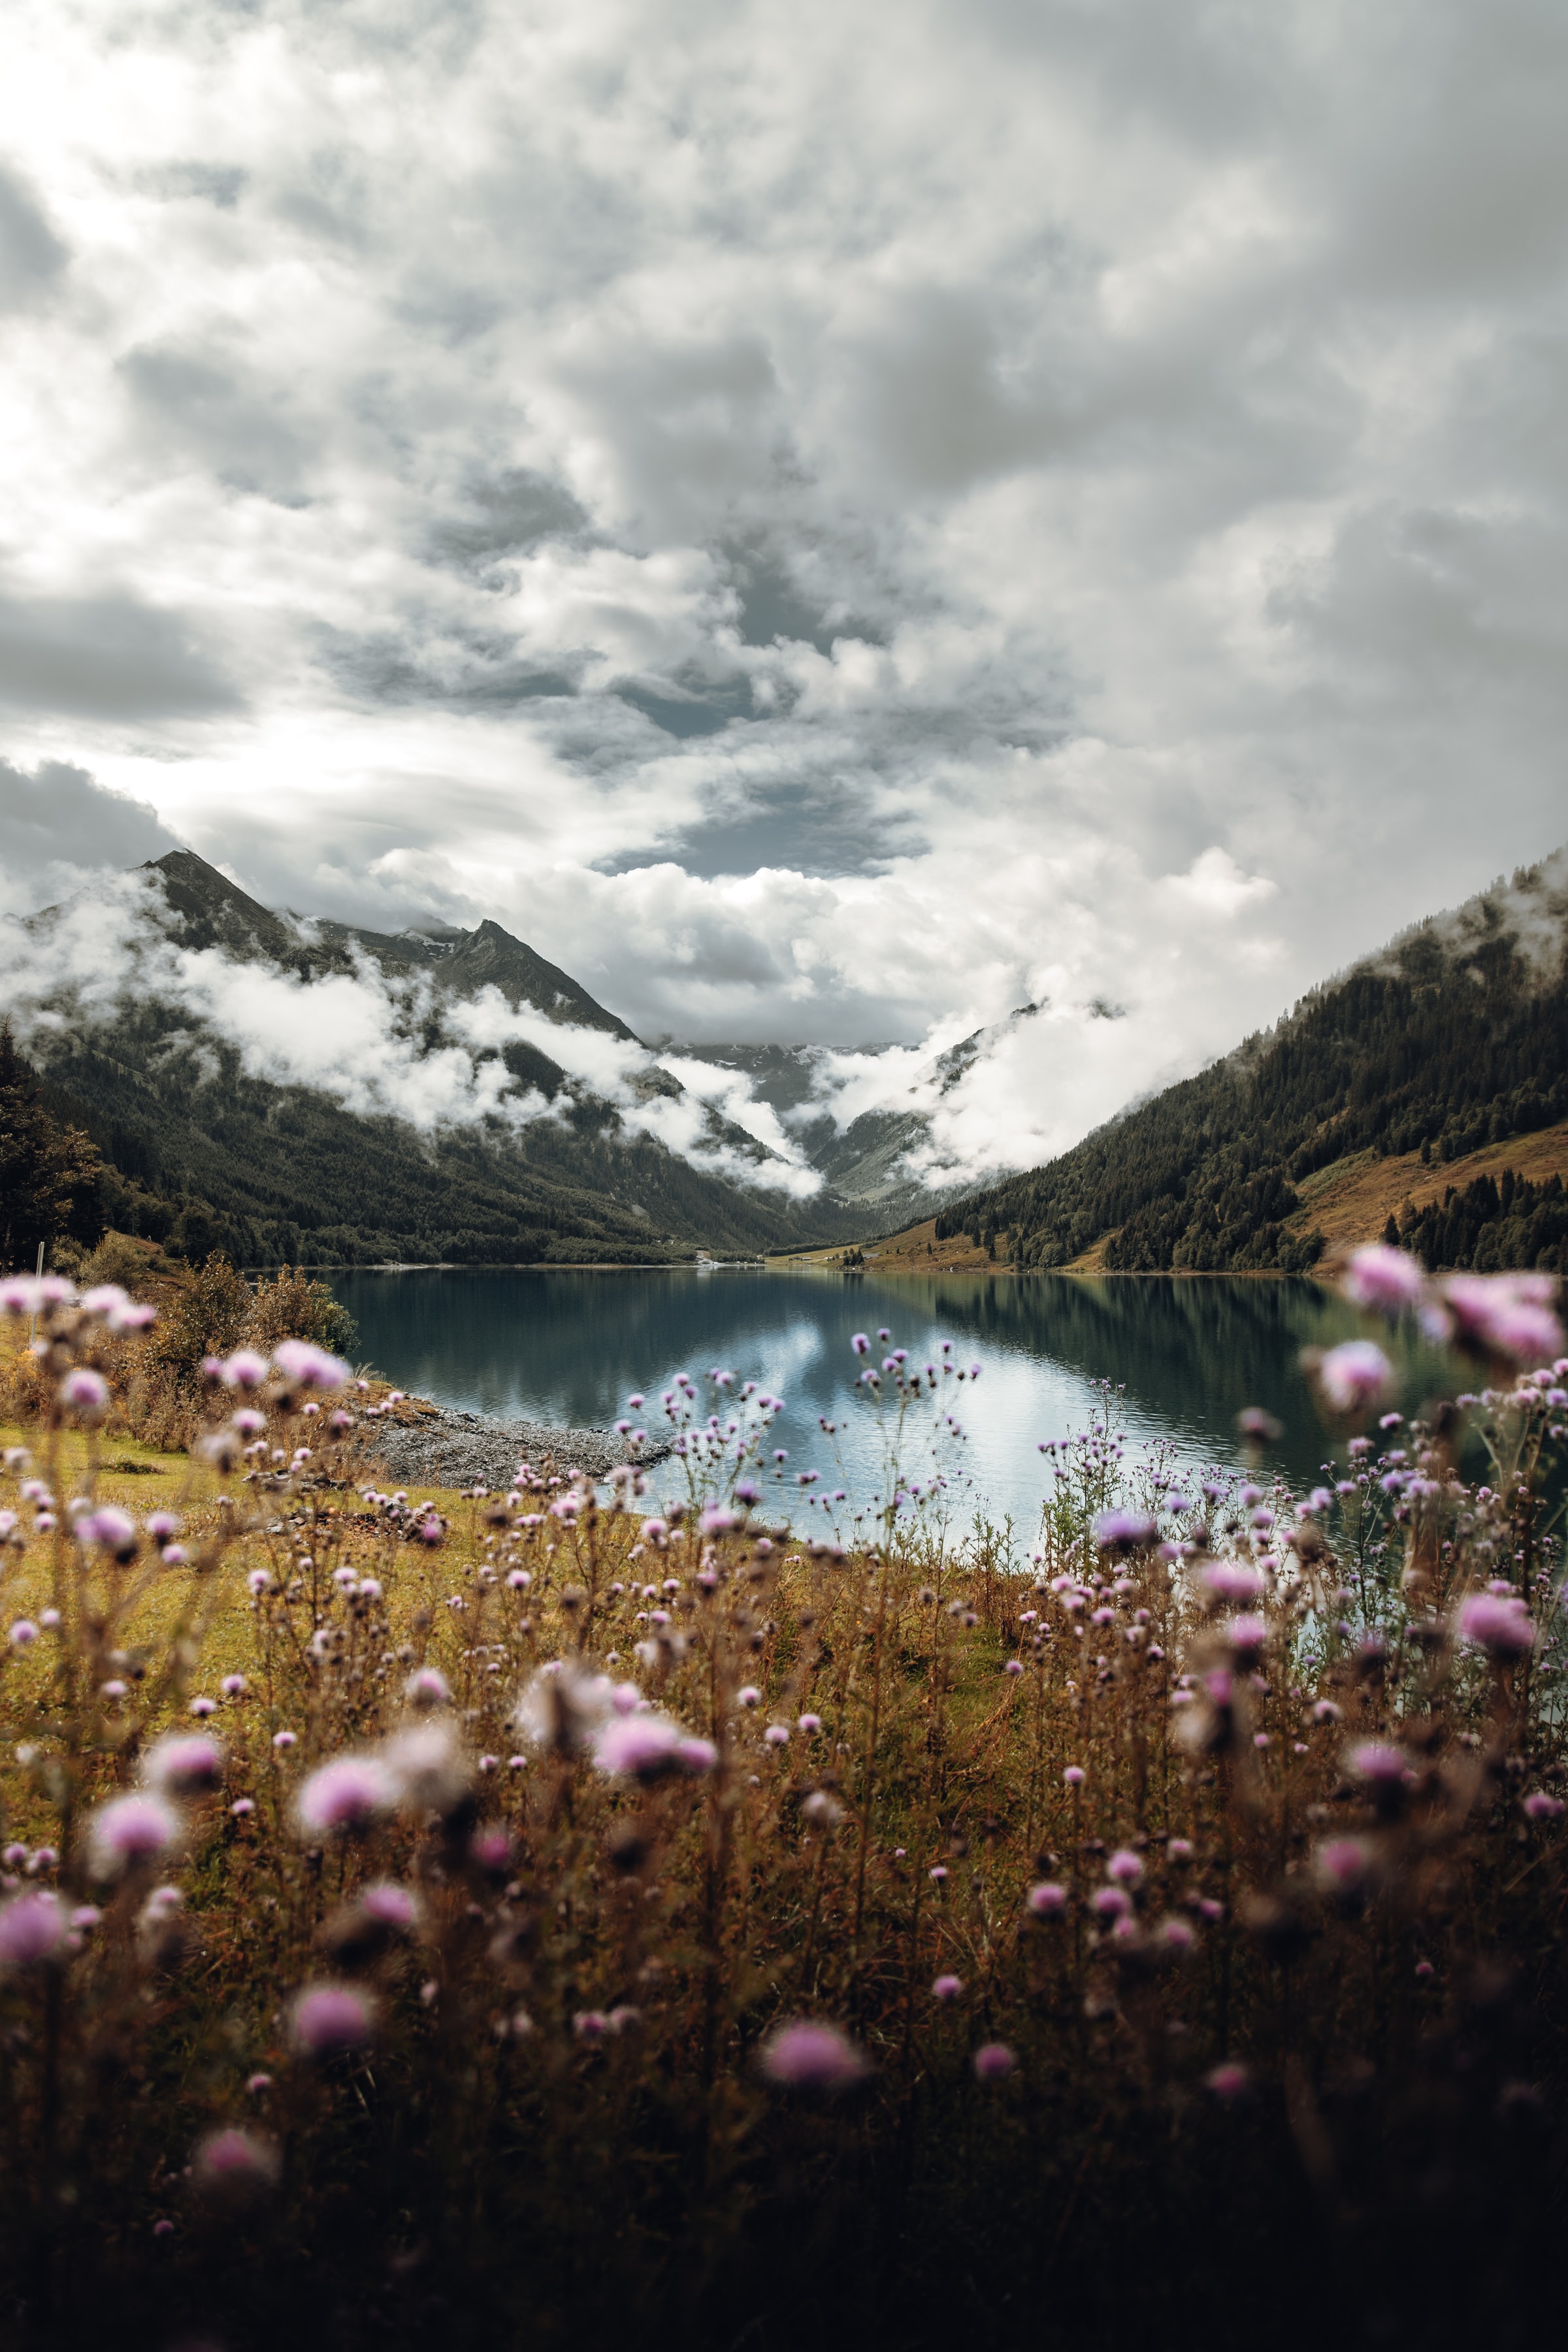 wildflowers, mountains, nature, sky, clouds, lake 1080p